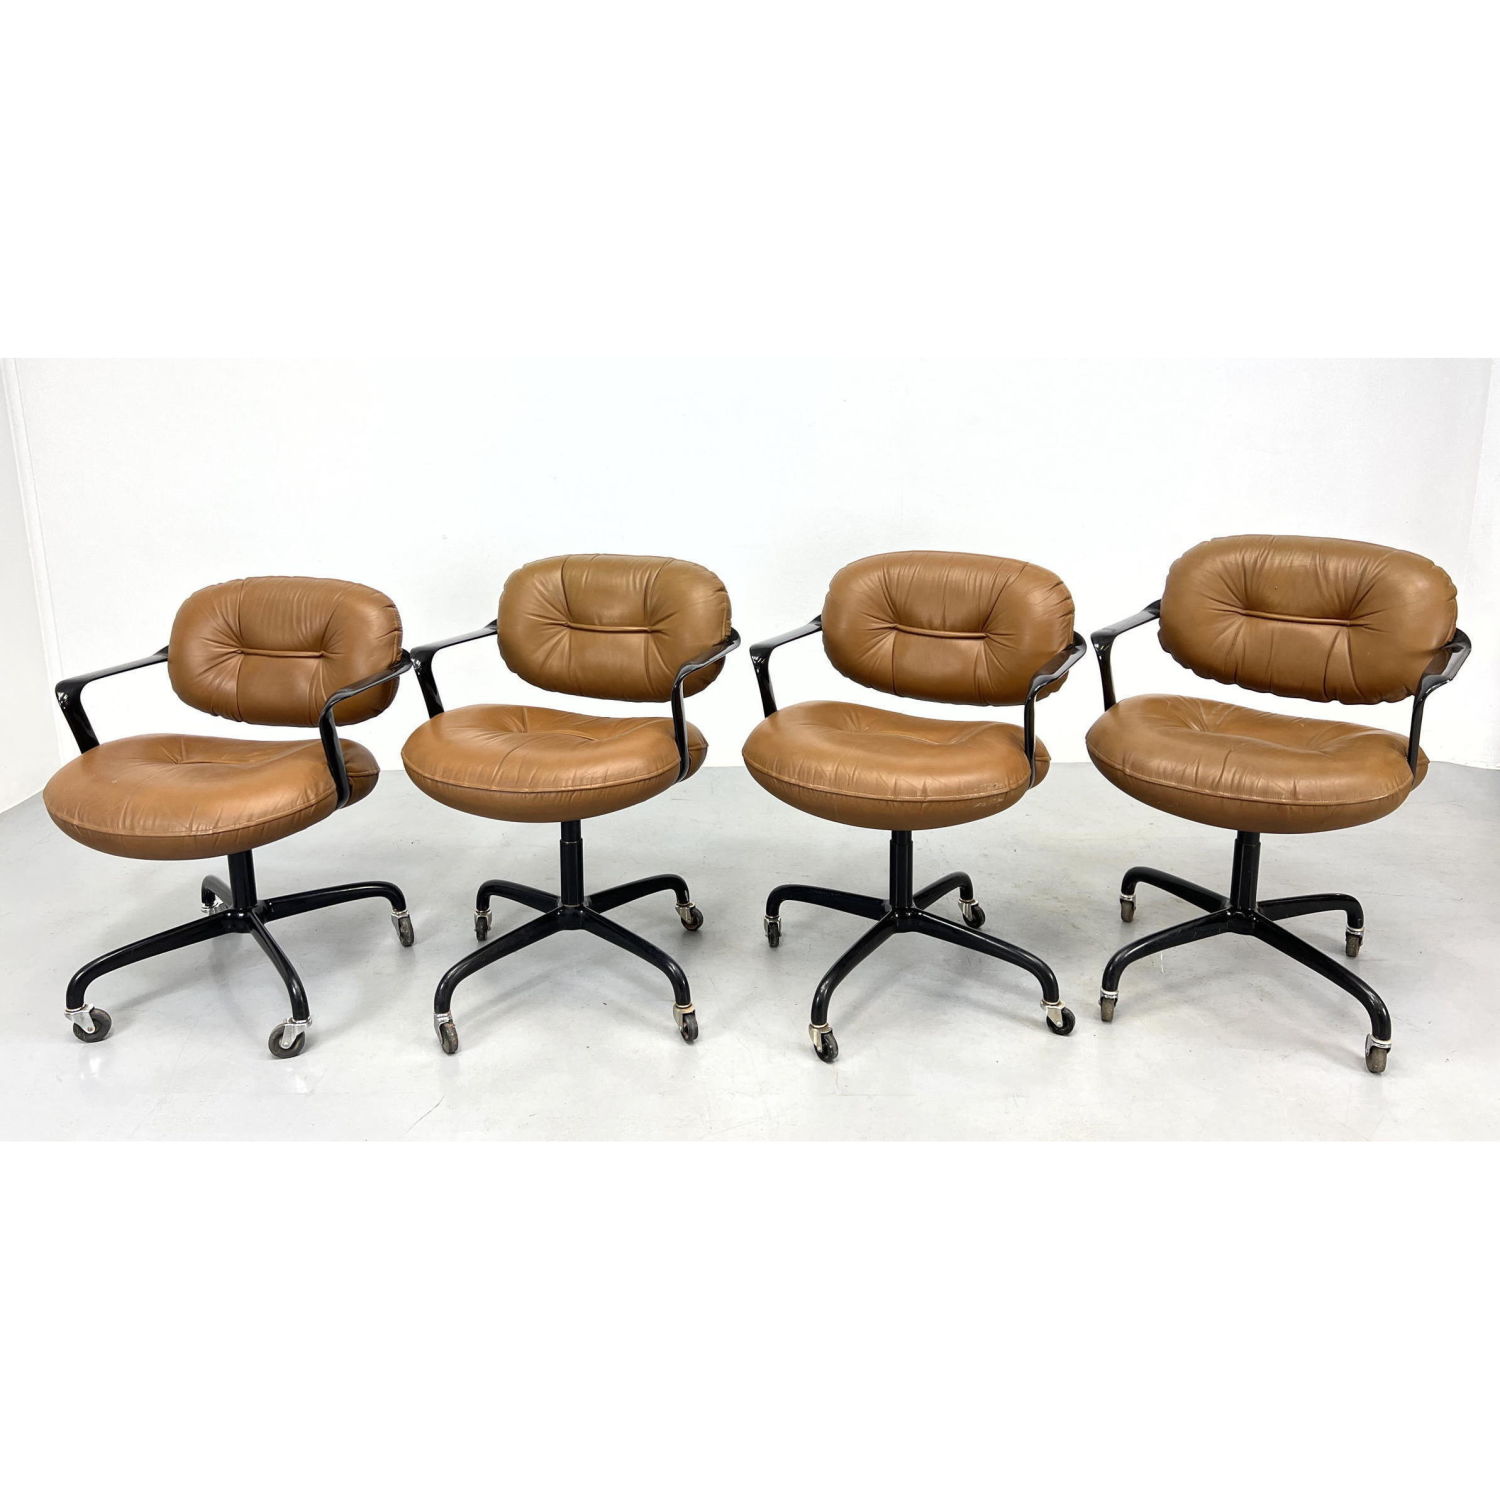 Set 4 Knoll Leather Swivel Chairs  2fe6f0